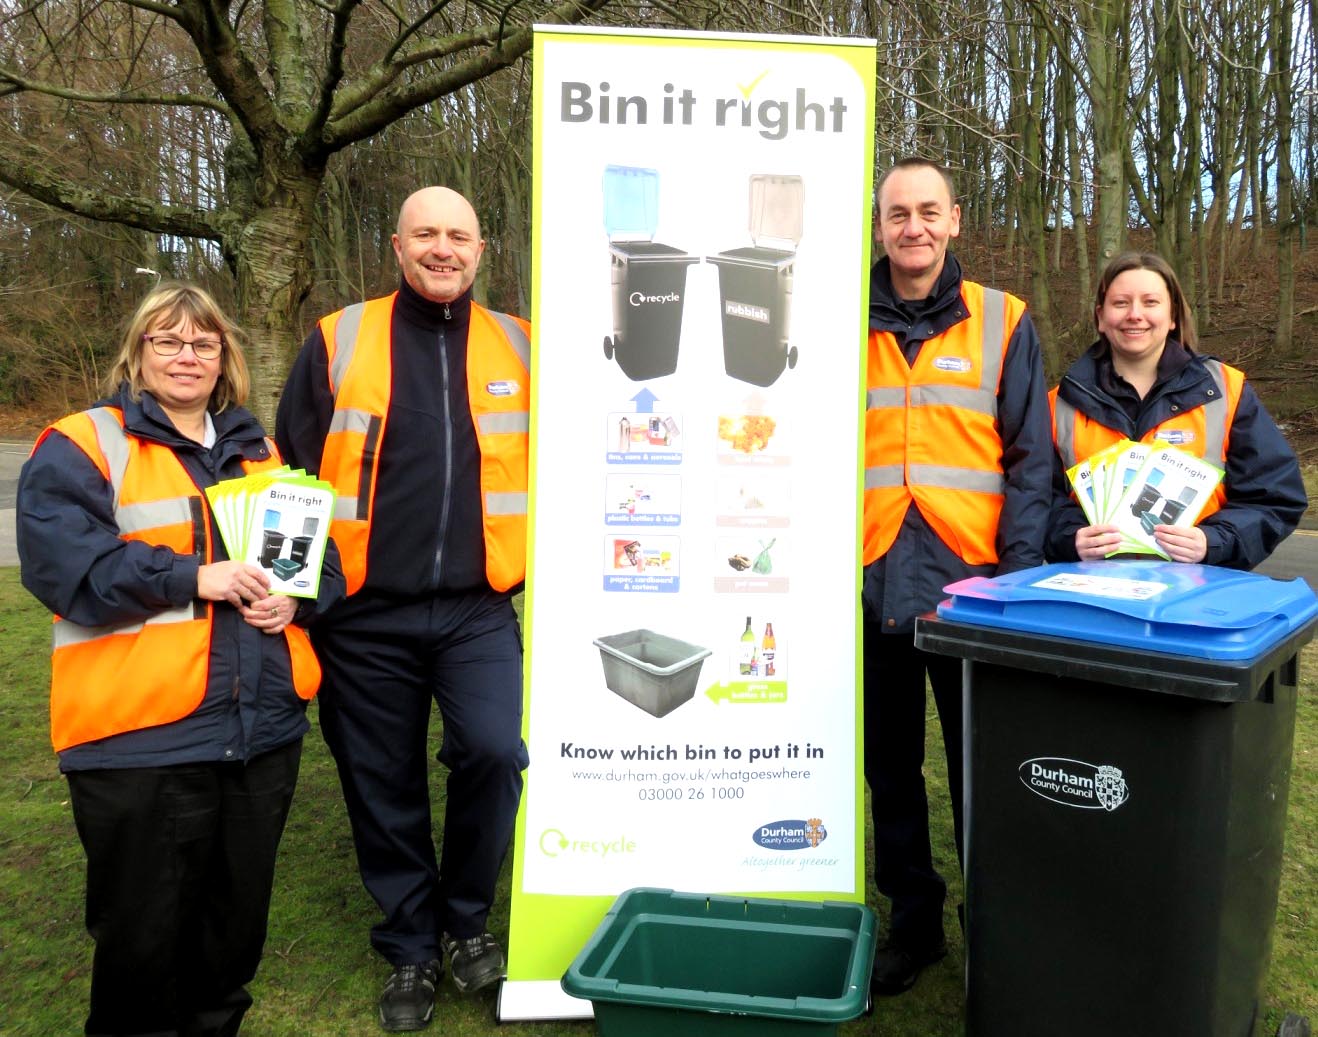 No Changes to Bin Collections